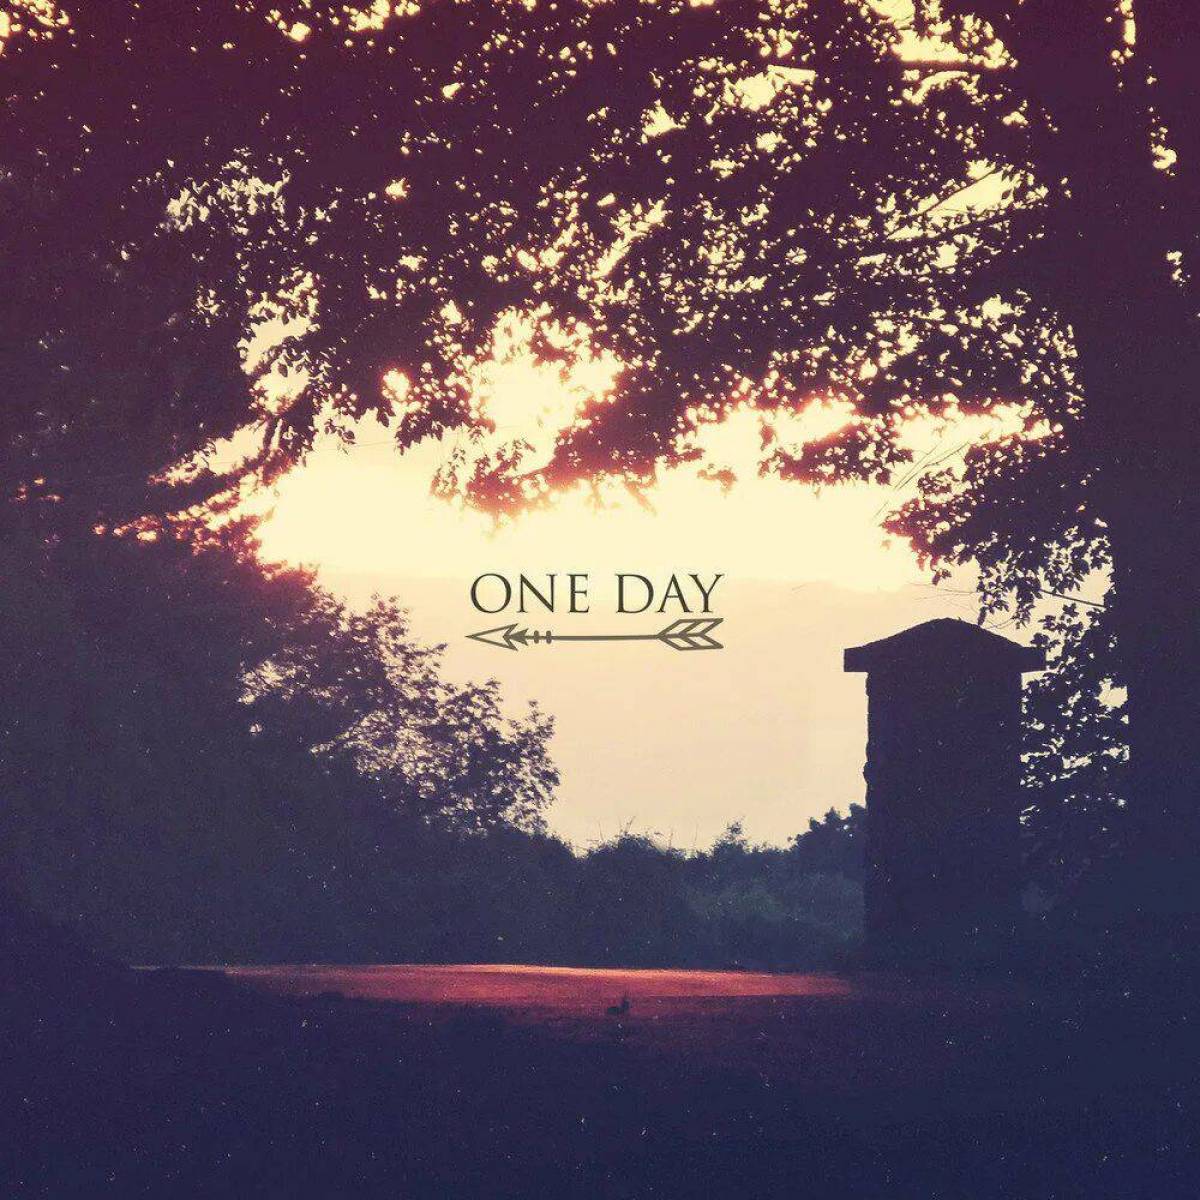 One day #10